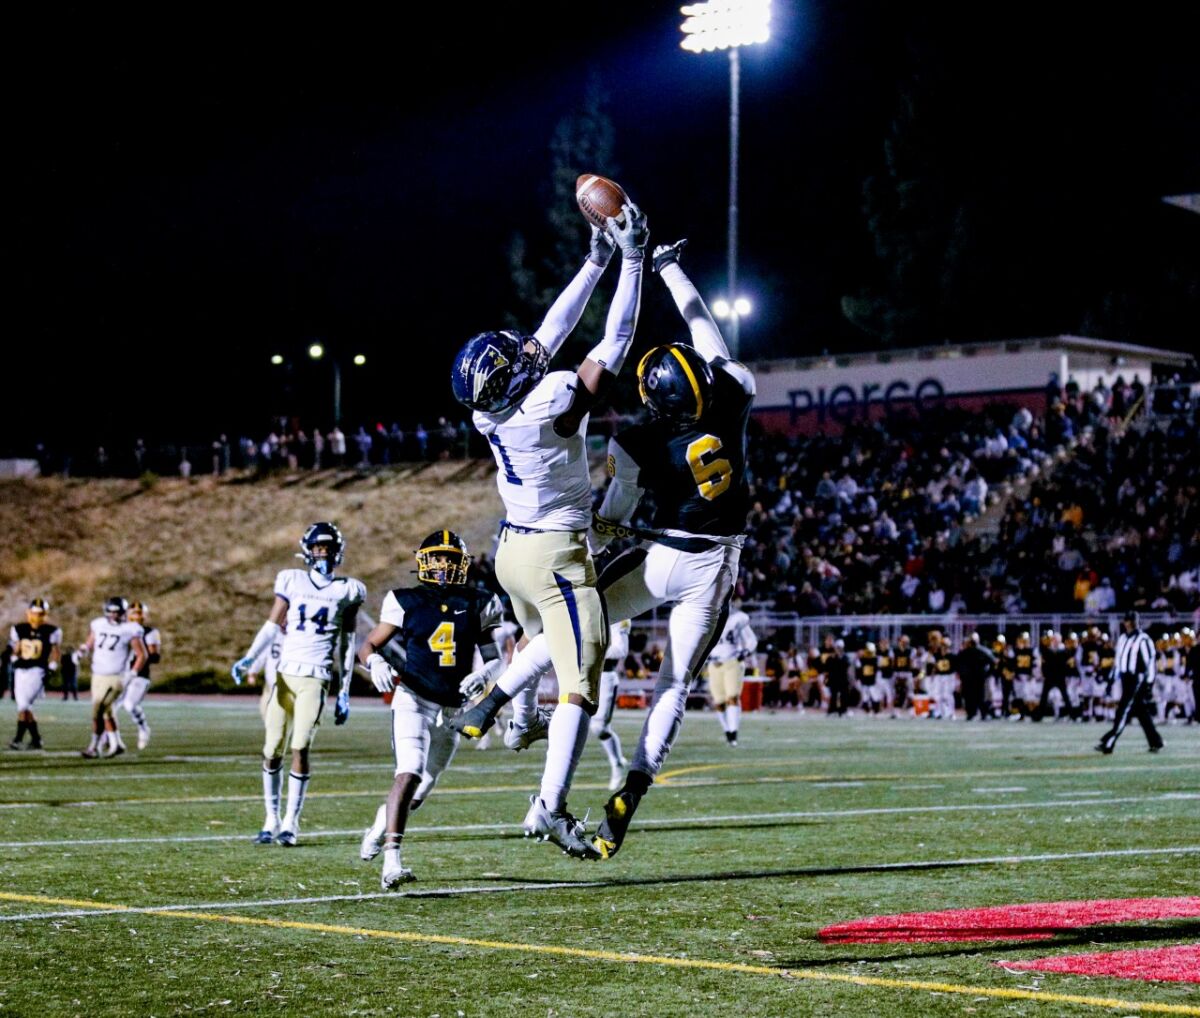 Arlis Boardingham stills the ball away from the San Pedro defender in the end zone for a Birmingham touchdown.